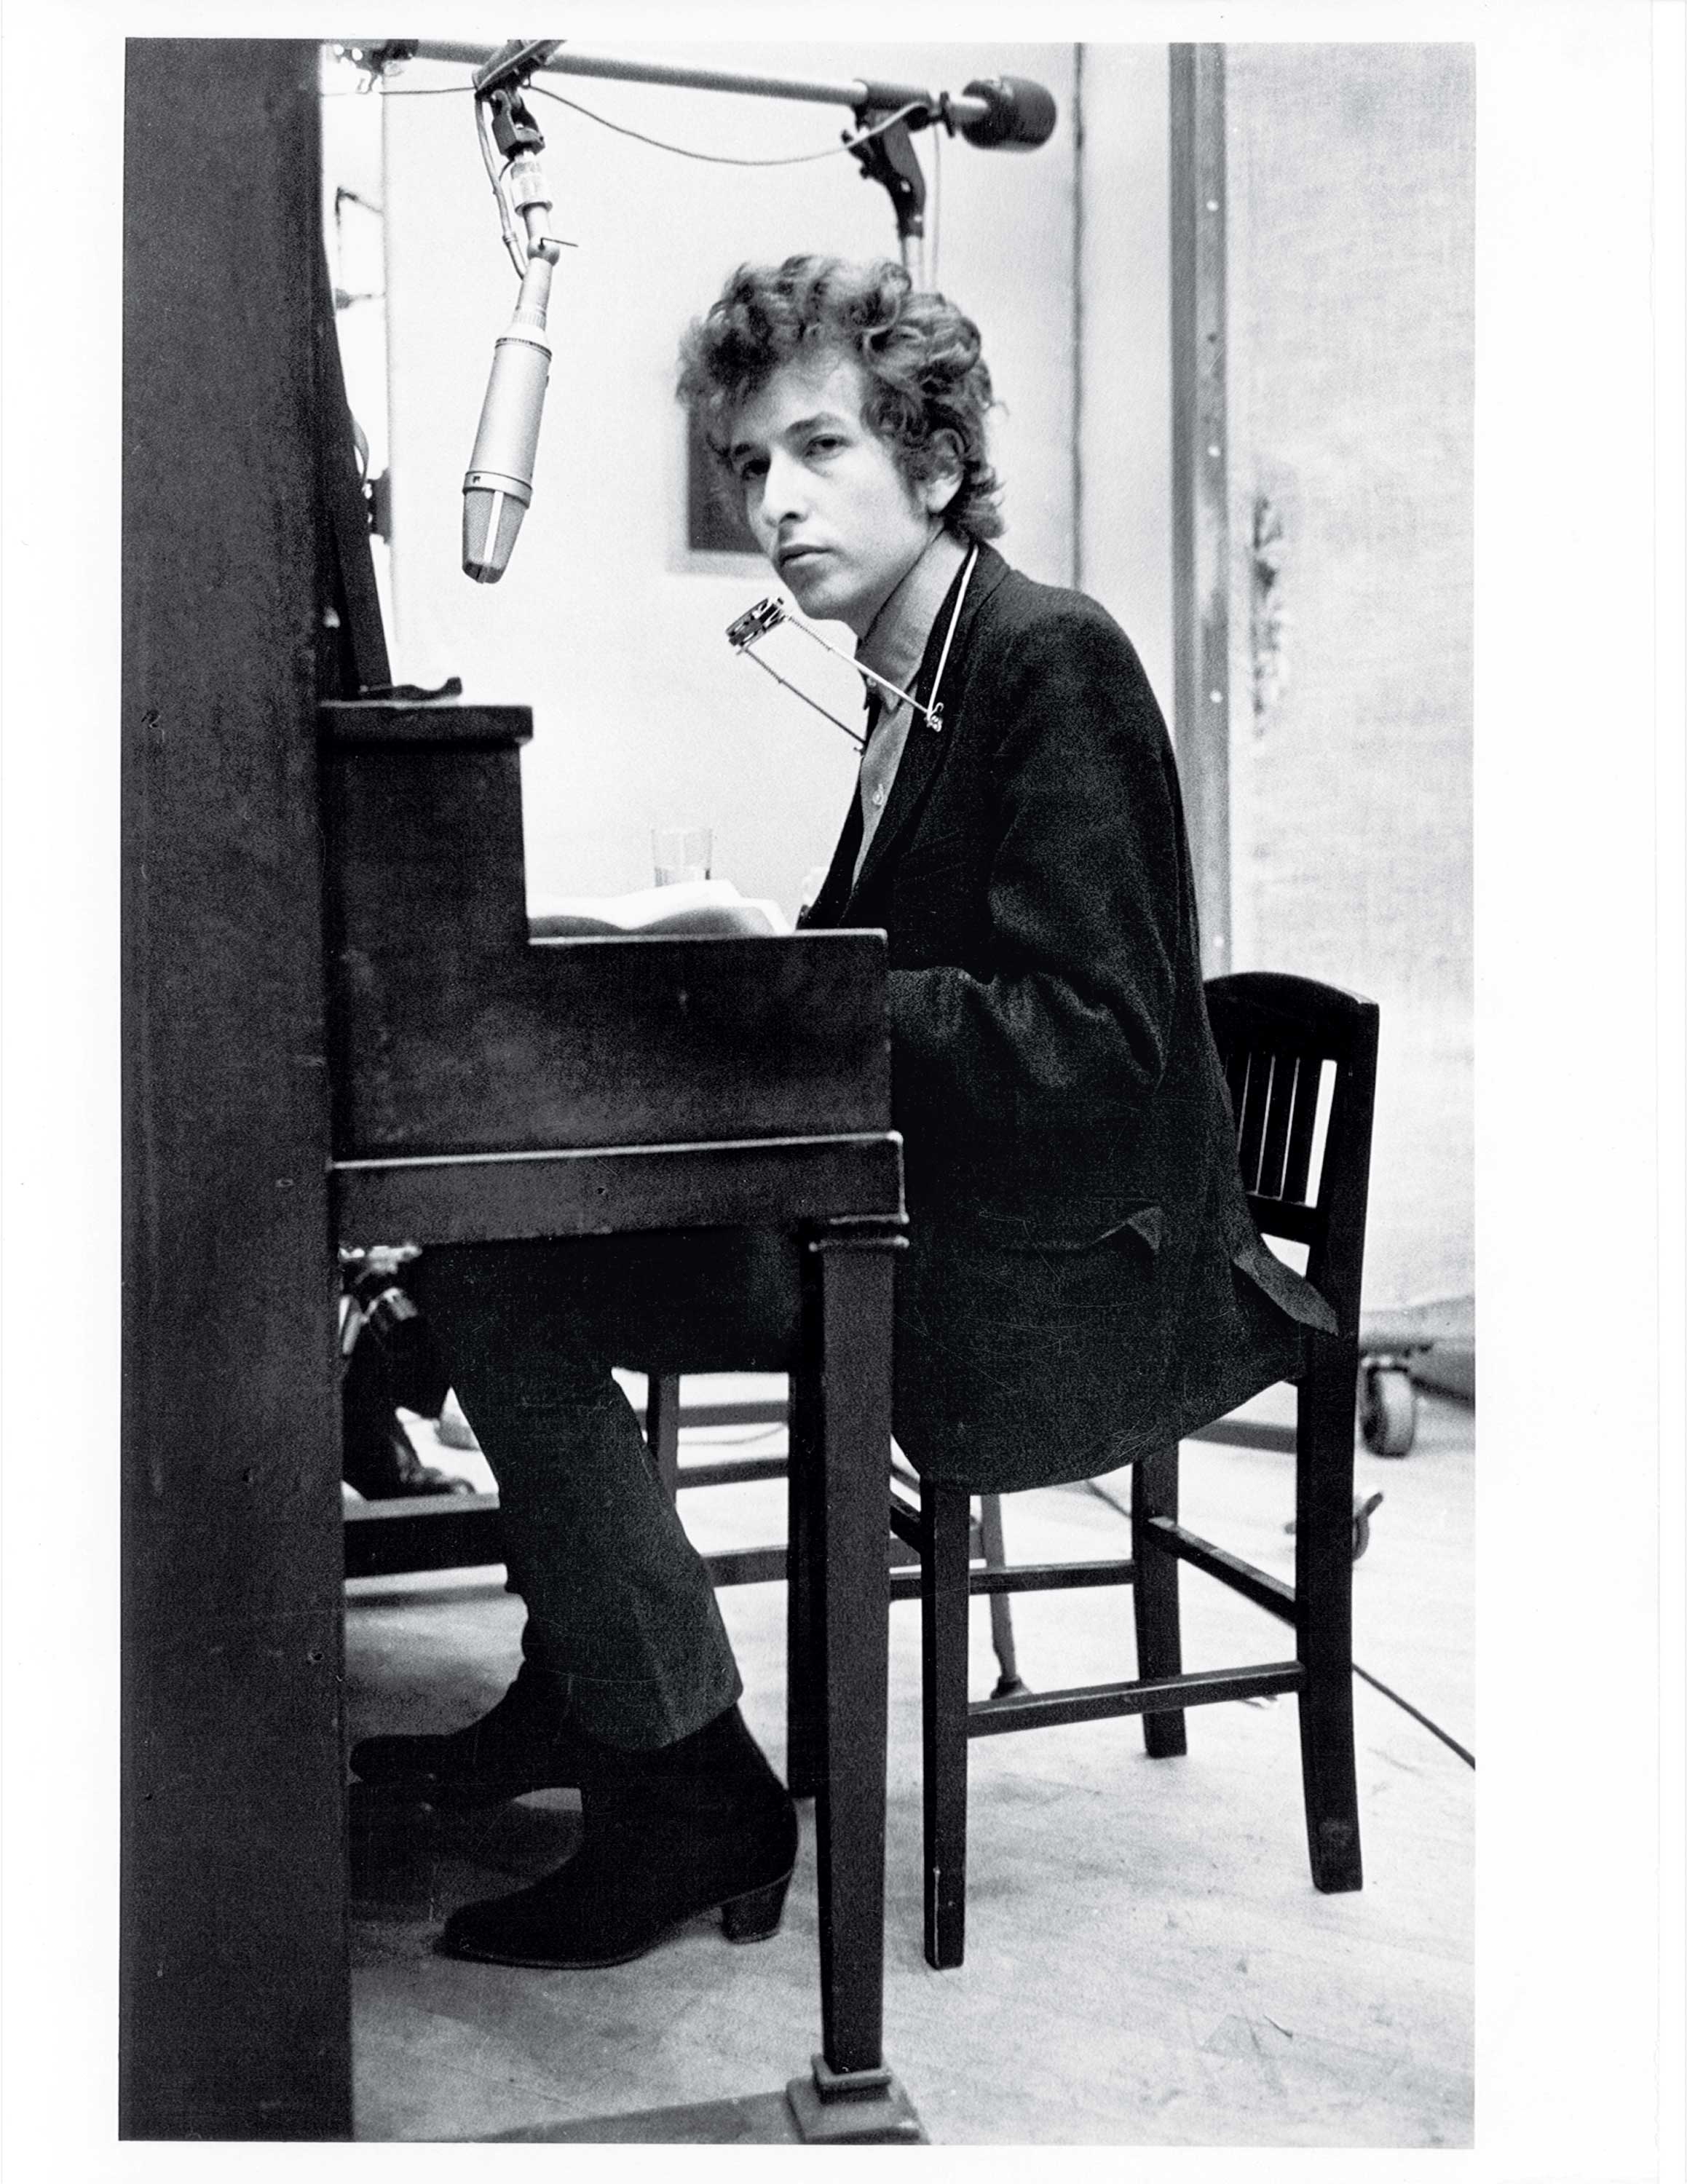 Dylan recording Highway 61 Revisited in New York City, 1965 (Michael Ochs Archives—Getty Images)